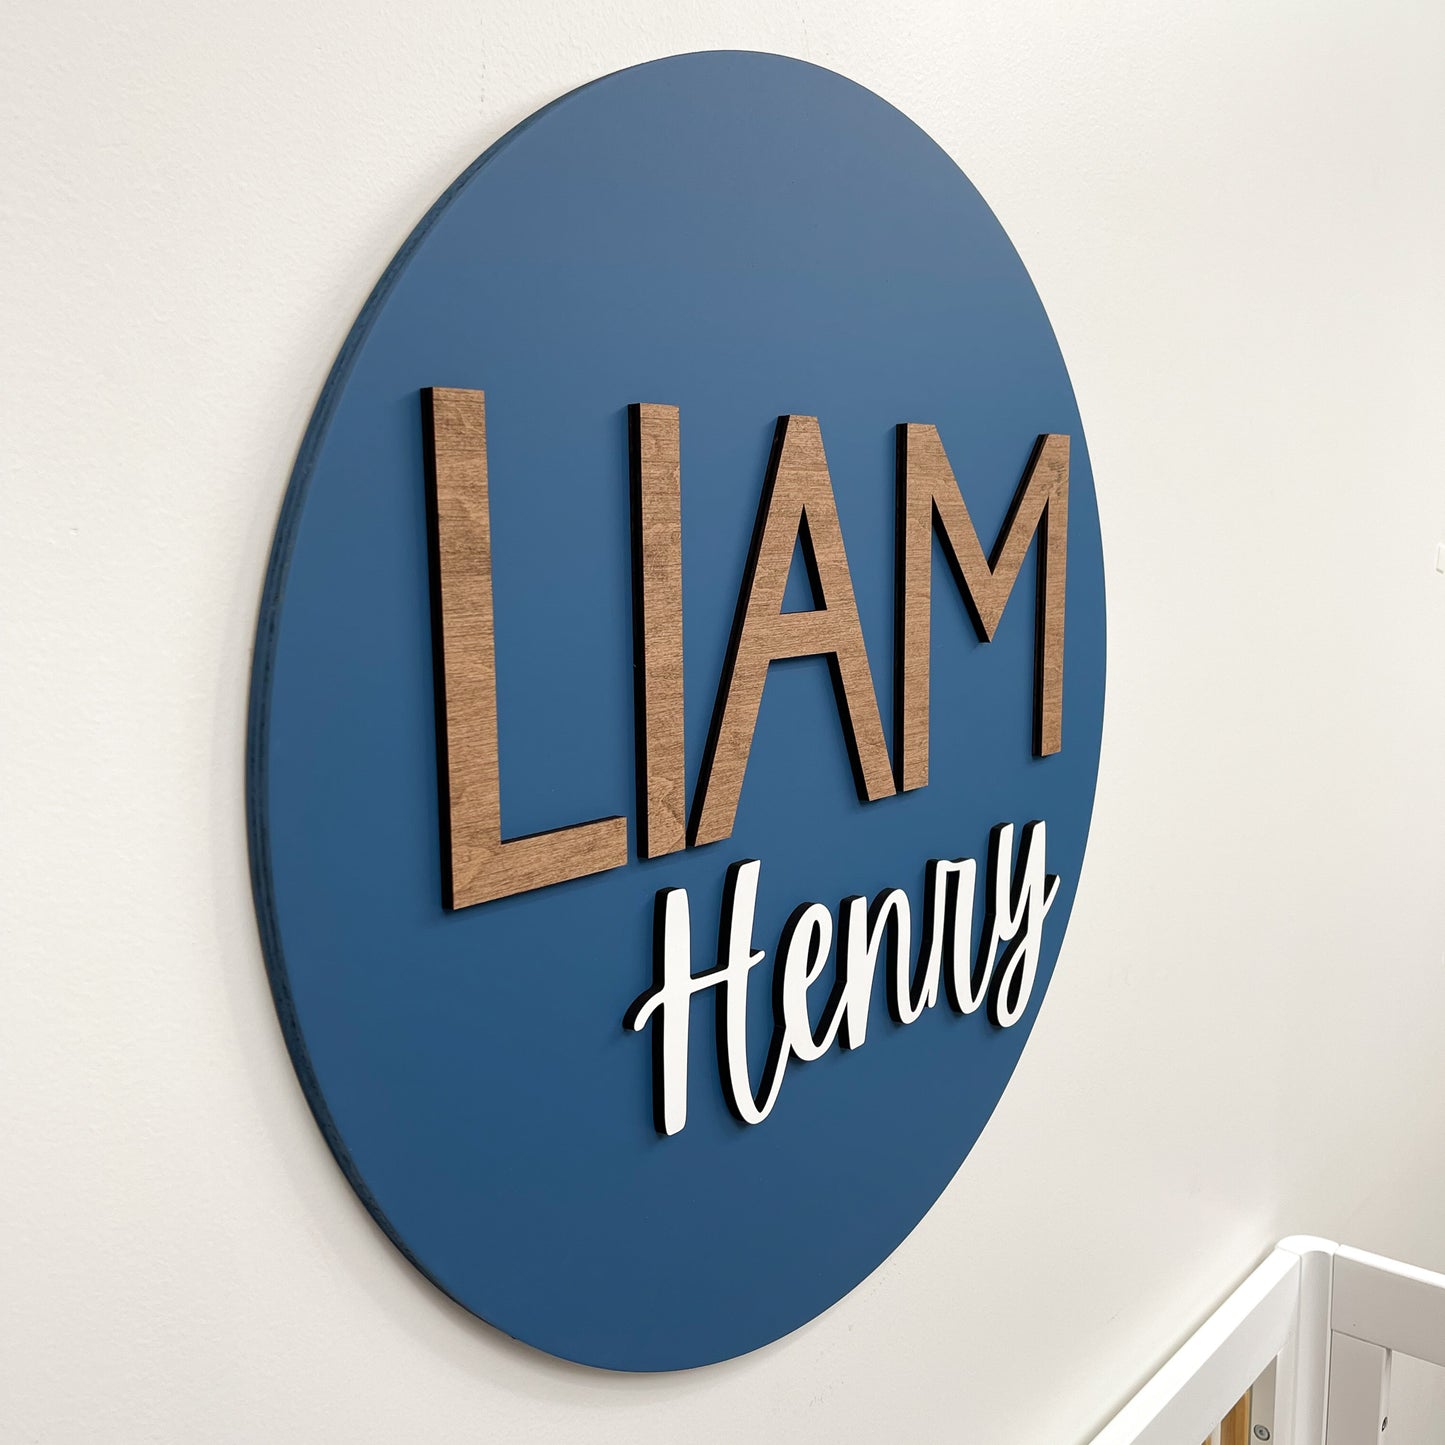 Liam Henry Round Name Sign